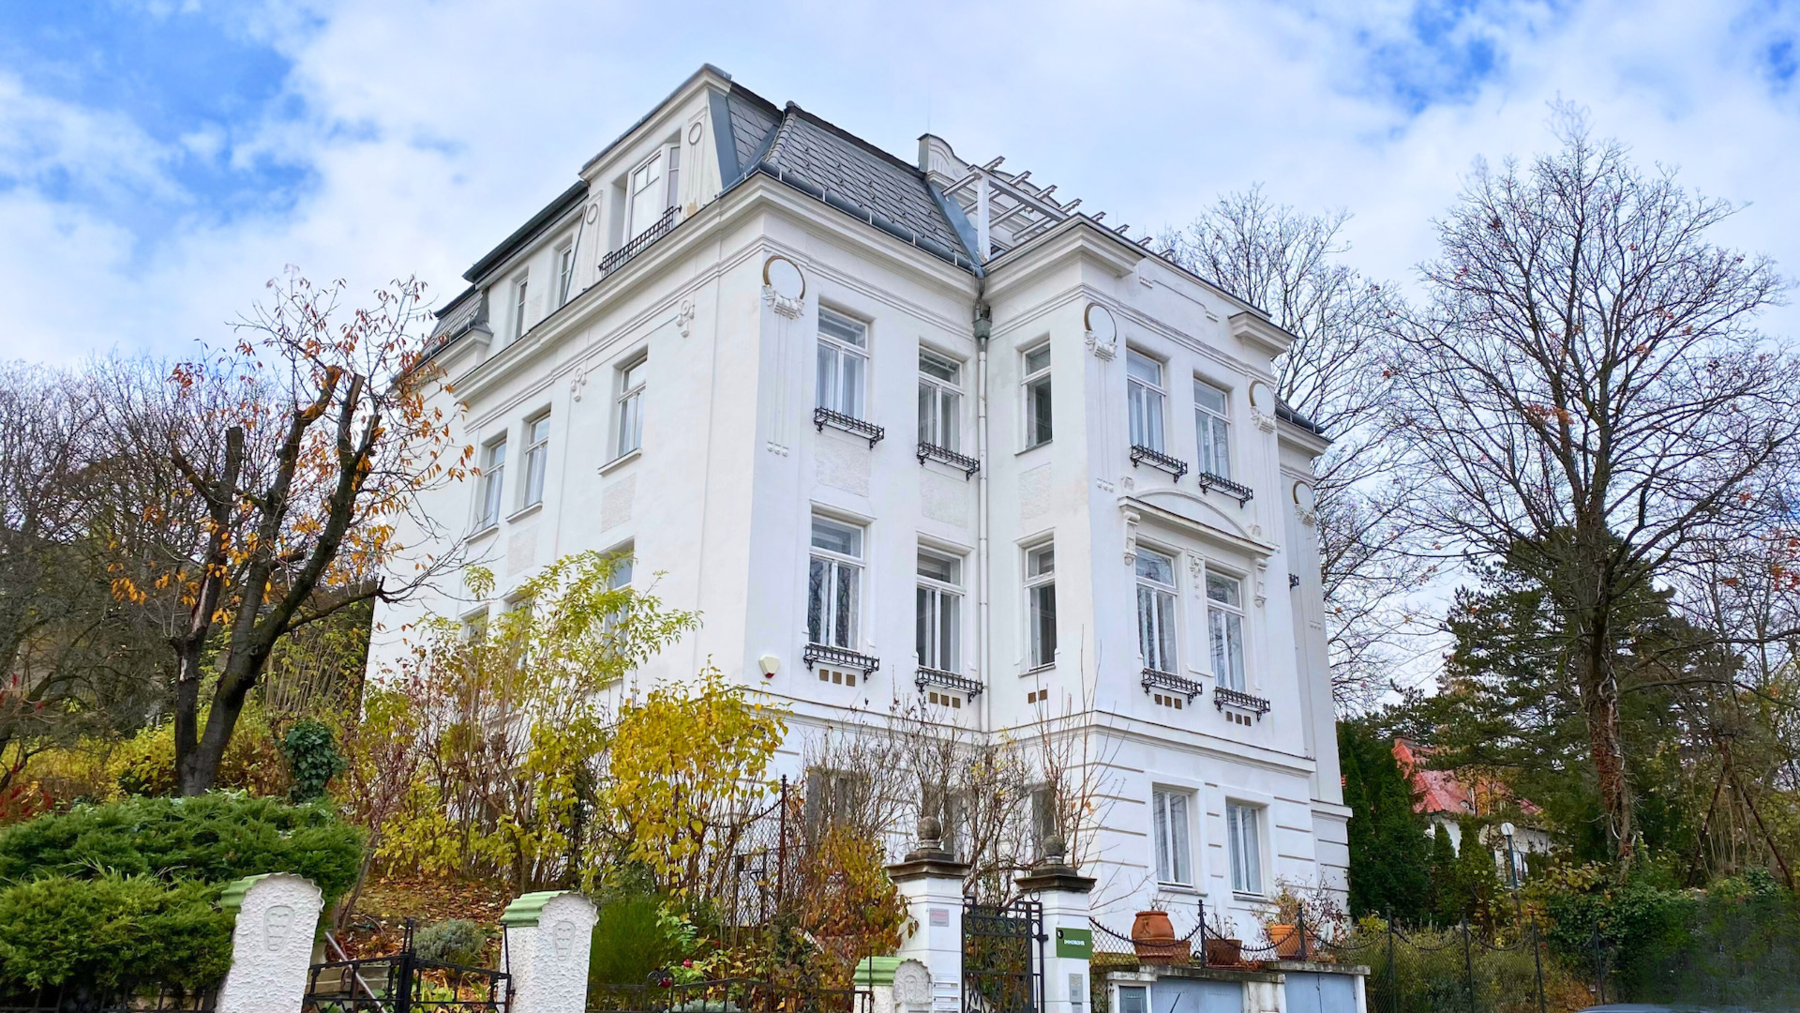  IMMOROHR Immobilien GmbH